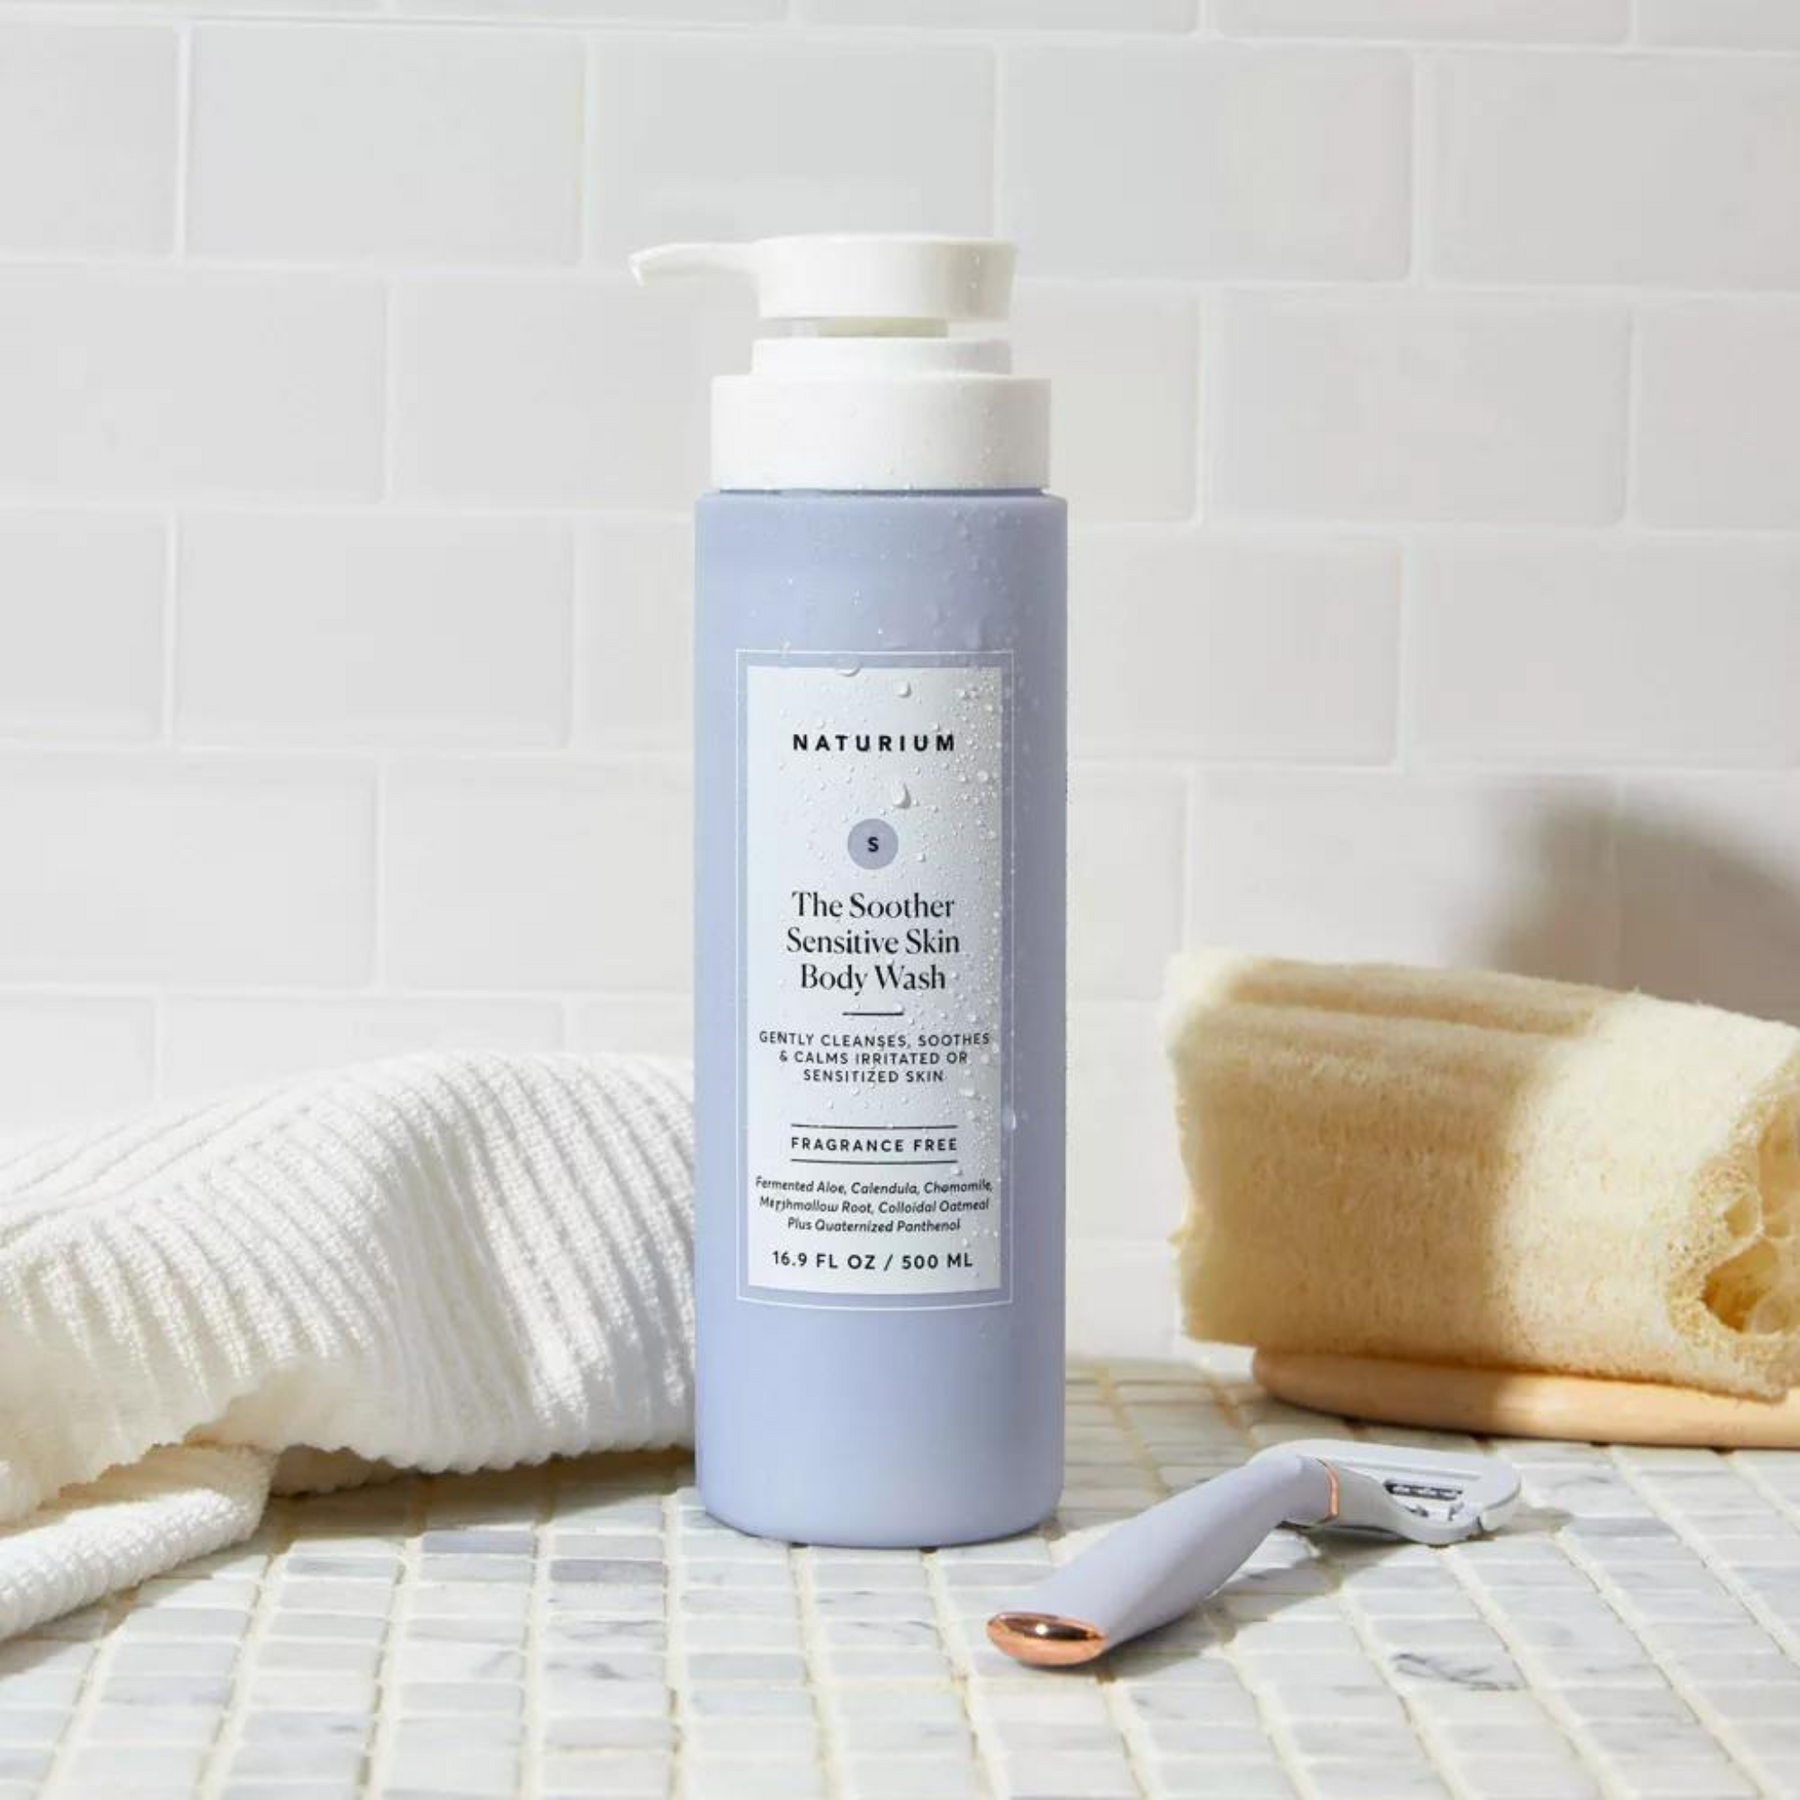 The Soother Sensitive Skin Body Wash